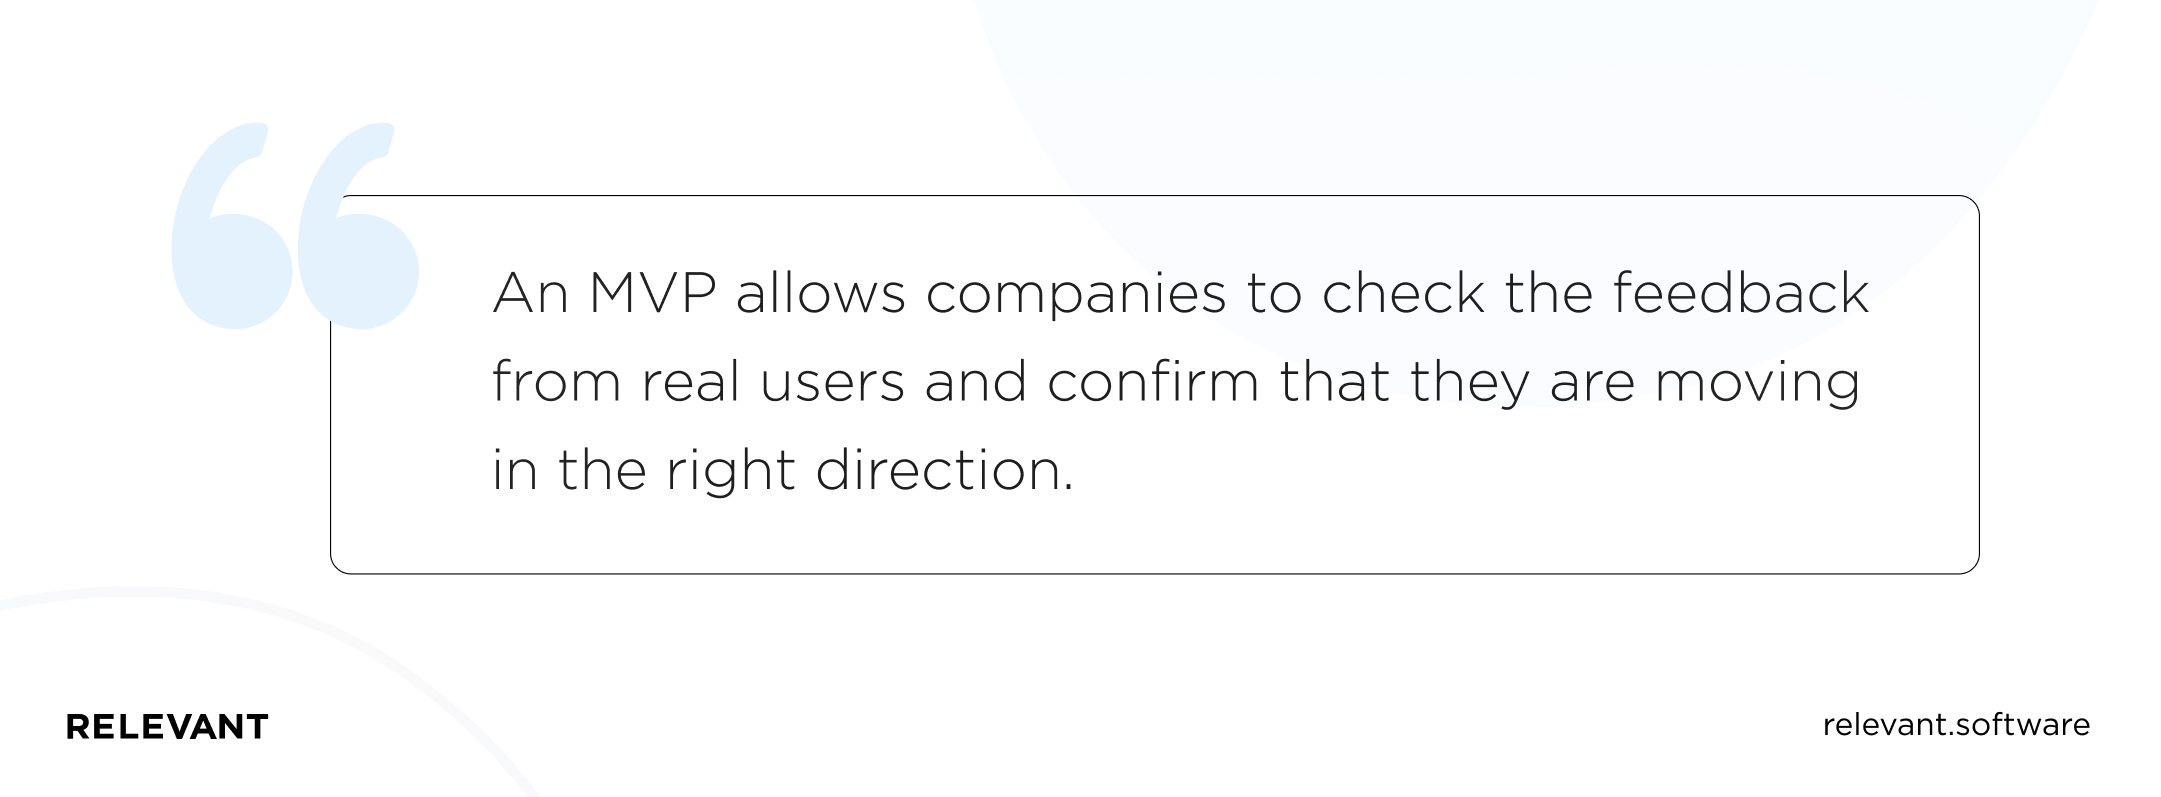 An MVP allows companies to check the feedback from real users and confirm that they are moving in the right direction.